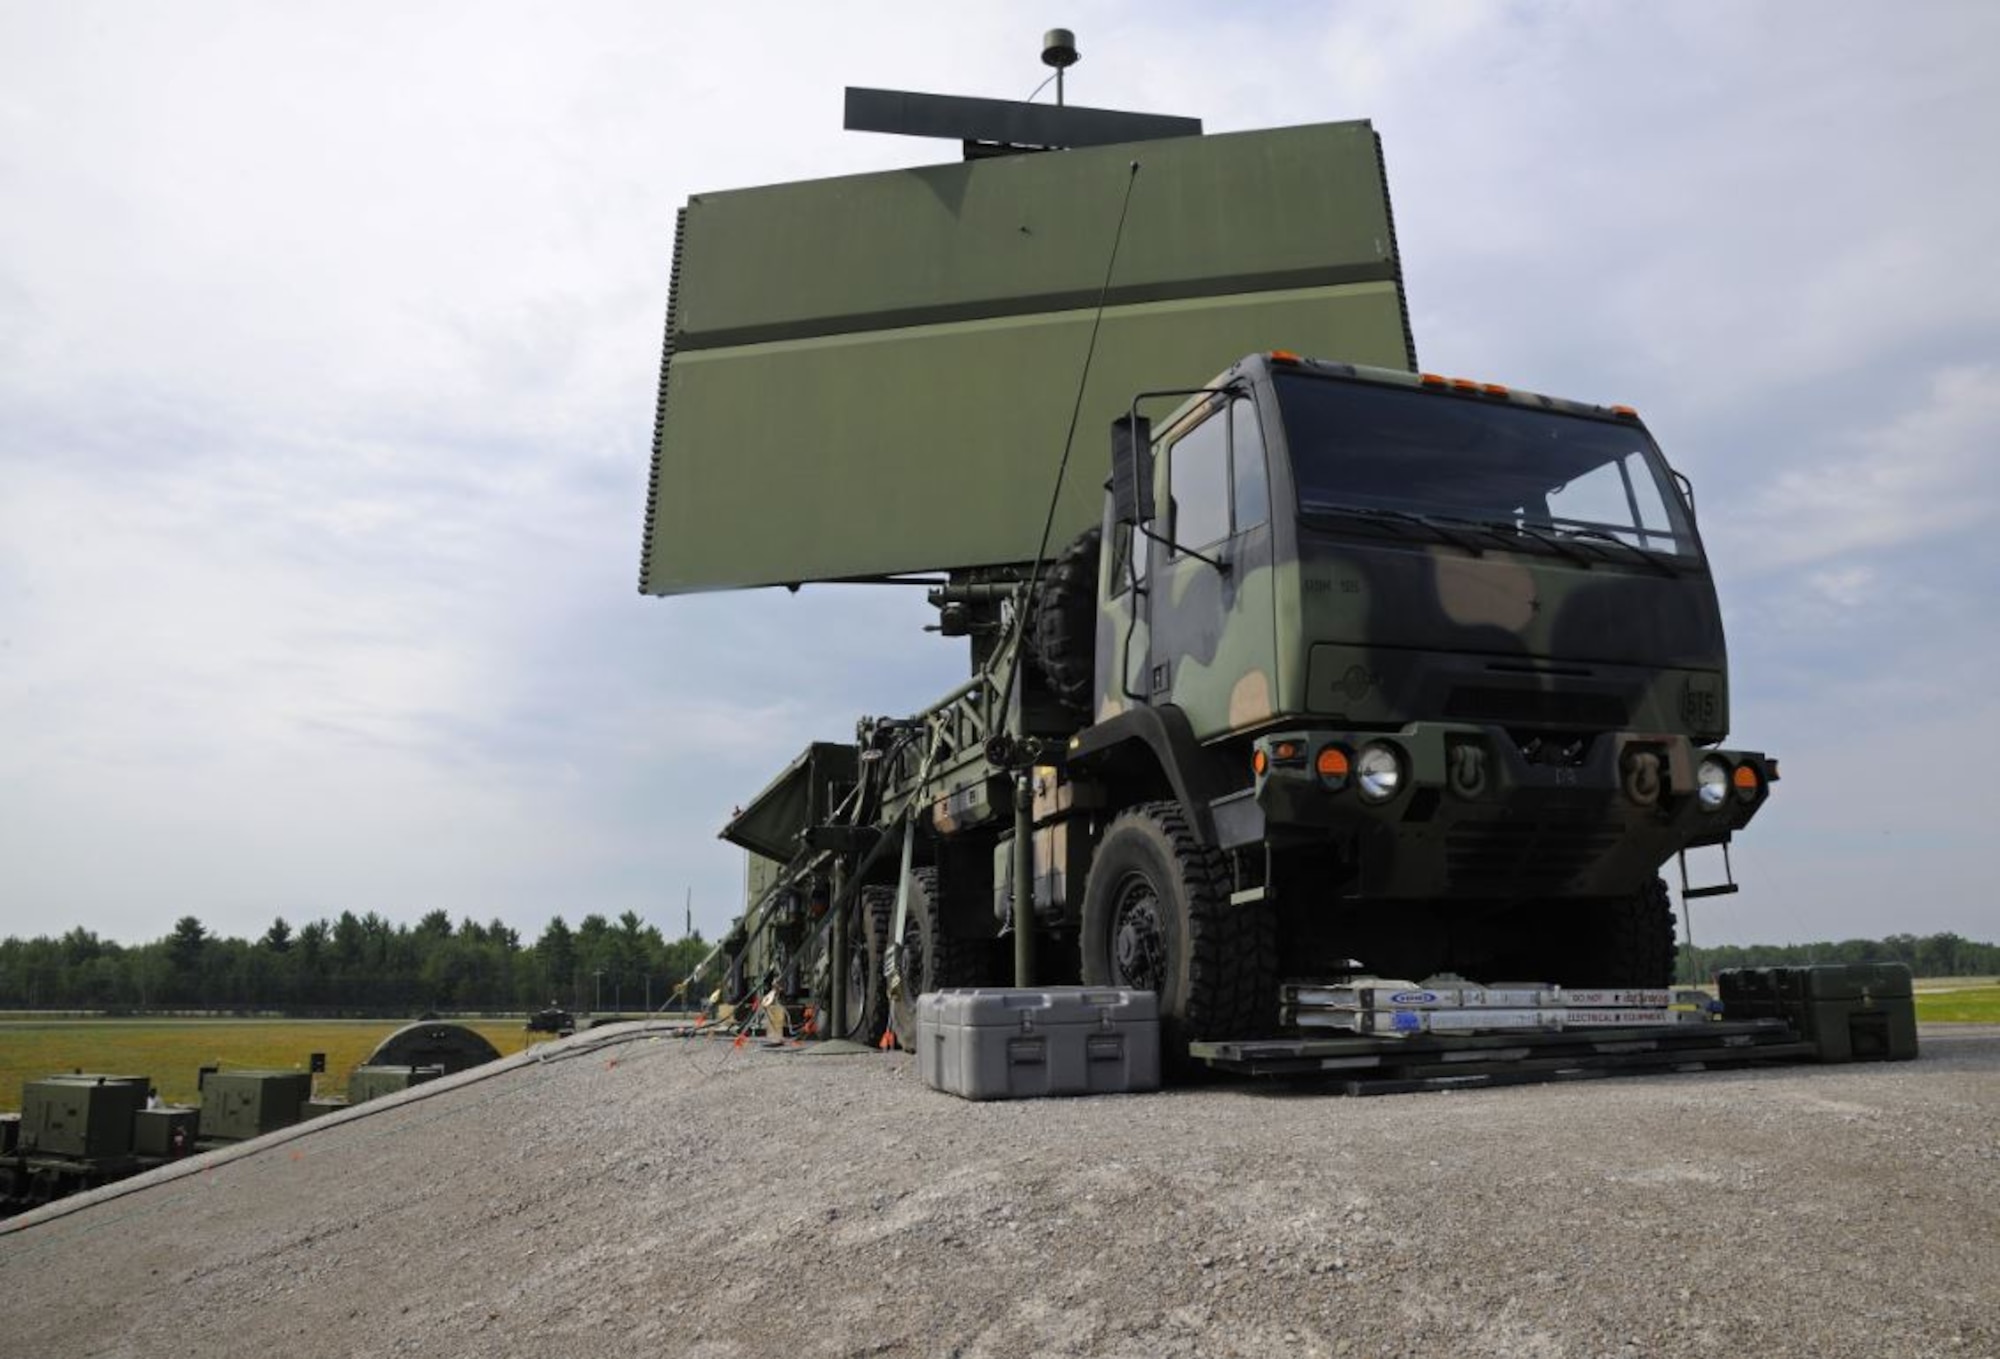 Officials from the Three-Dimensional Expeditionary Long-Range Radar Rapid Prototyping program office, headquartered at Hanscom Air Force Base, Mass., are currently utilizing the “SpeedDealer” strategy to acquire a production-ready, commercially available upgrade for the TPS-75 radar, pictured on a transport vehicle here. To support this effort, the team awarded a $4 million integration contract with production options to Northrop Grumman Corp. Sept. 17. (U.S. Air National Guard photo by Senior Airman Ryan Zeski/Released)